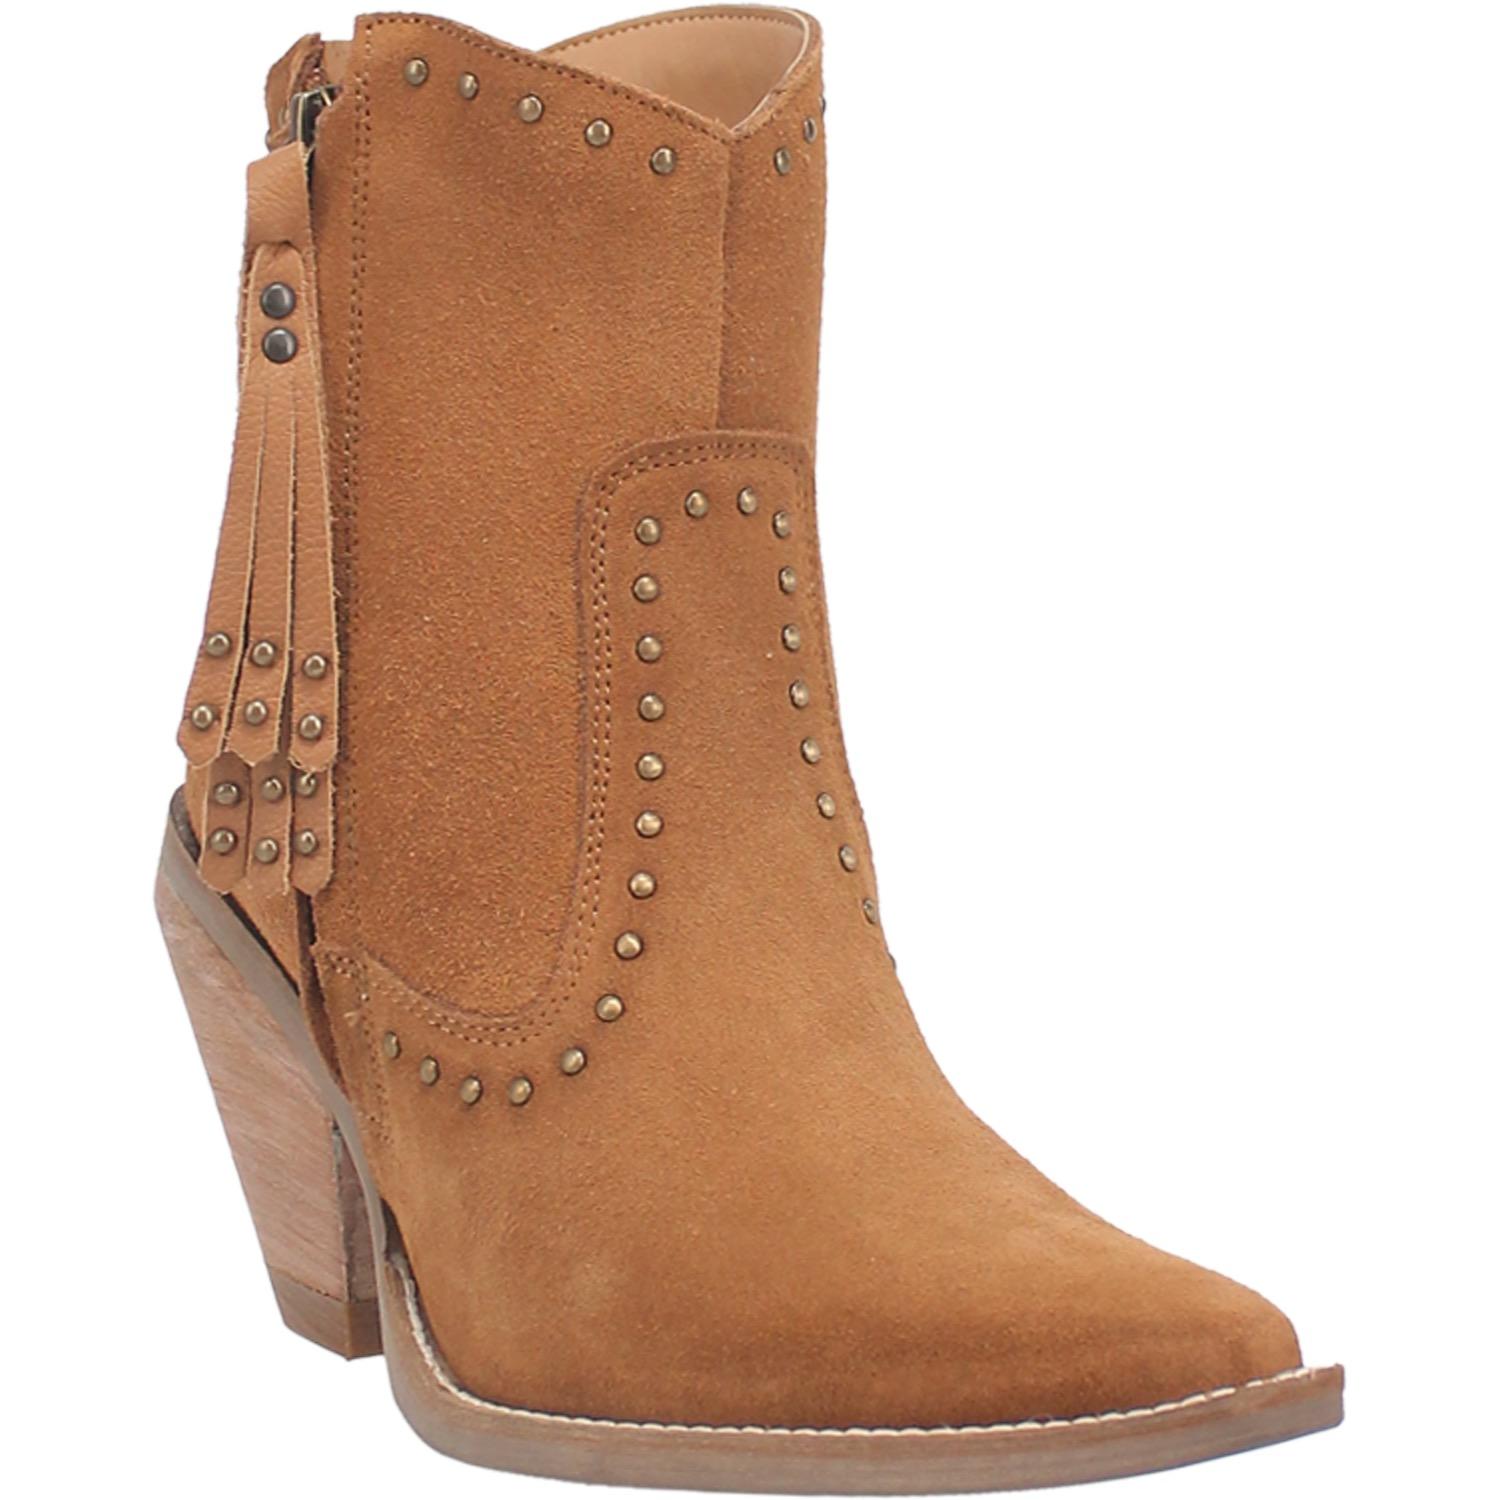 The boots shown are a low calf height bootie with a snip pointed toe made of genuine leather. The stud design and detail adds an additional edge to any outfit you pair them with. This pair is camel suede.